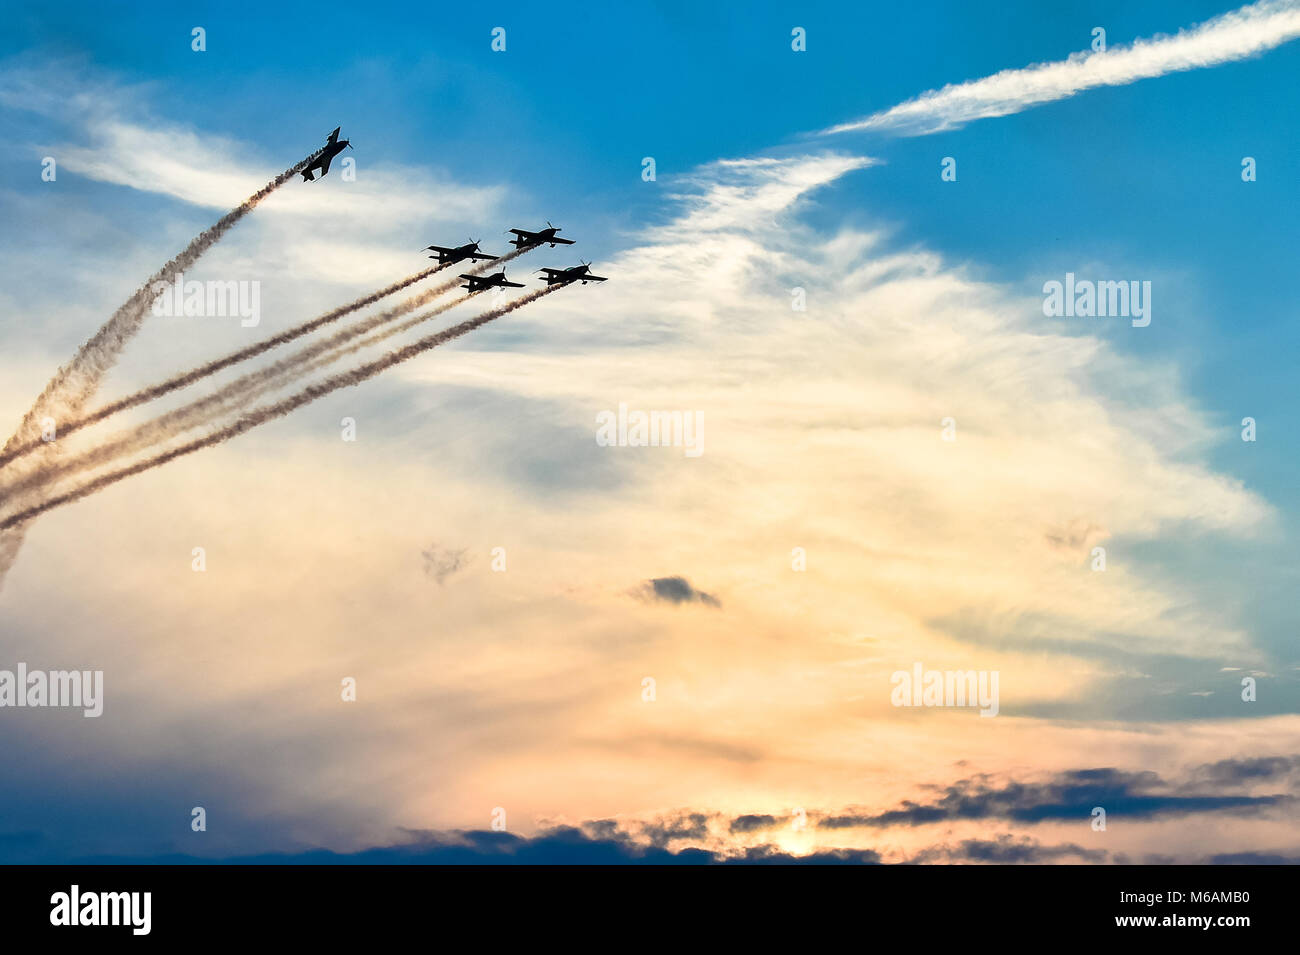 Acrobatic planes in action at an Airshow flying at sunset / dusk Stock Photo